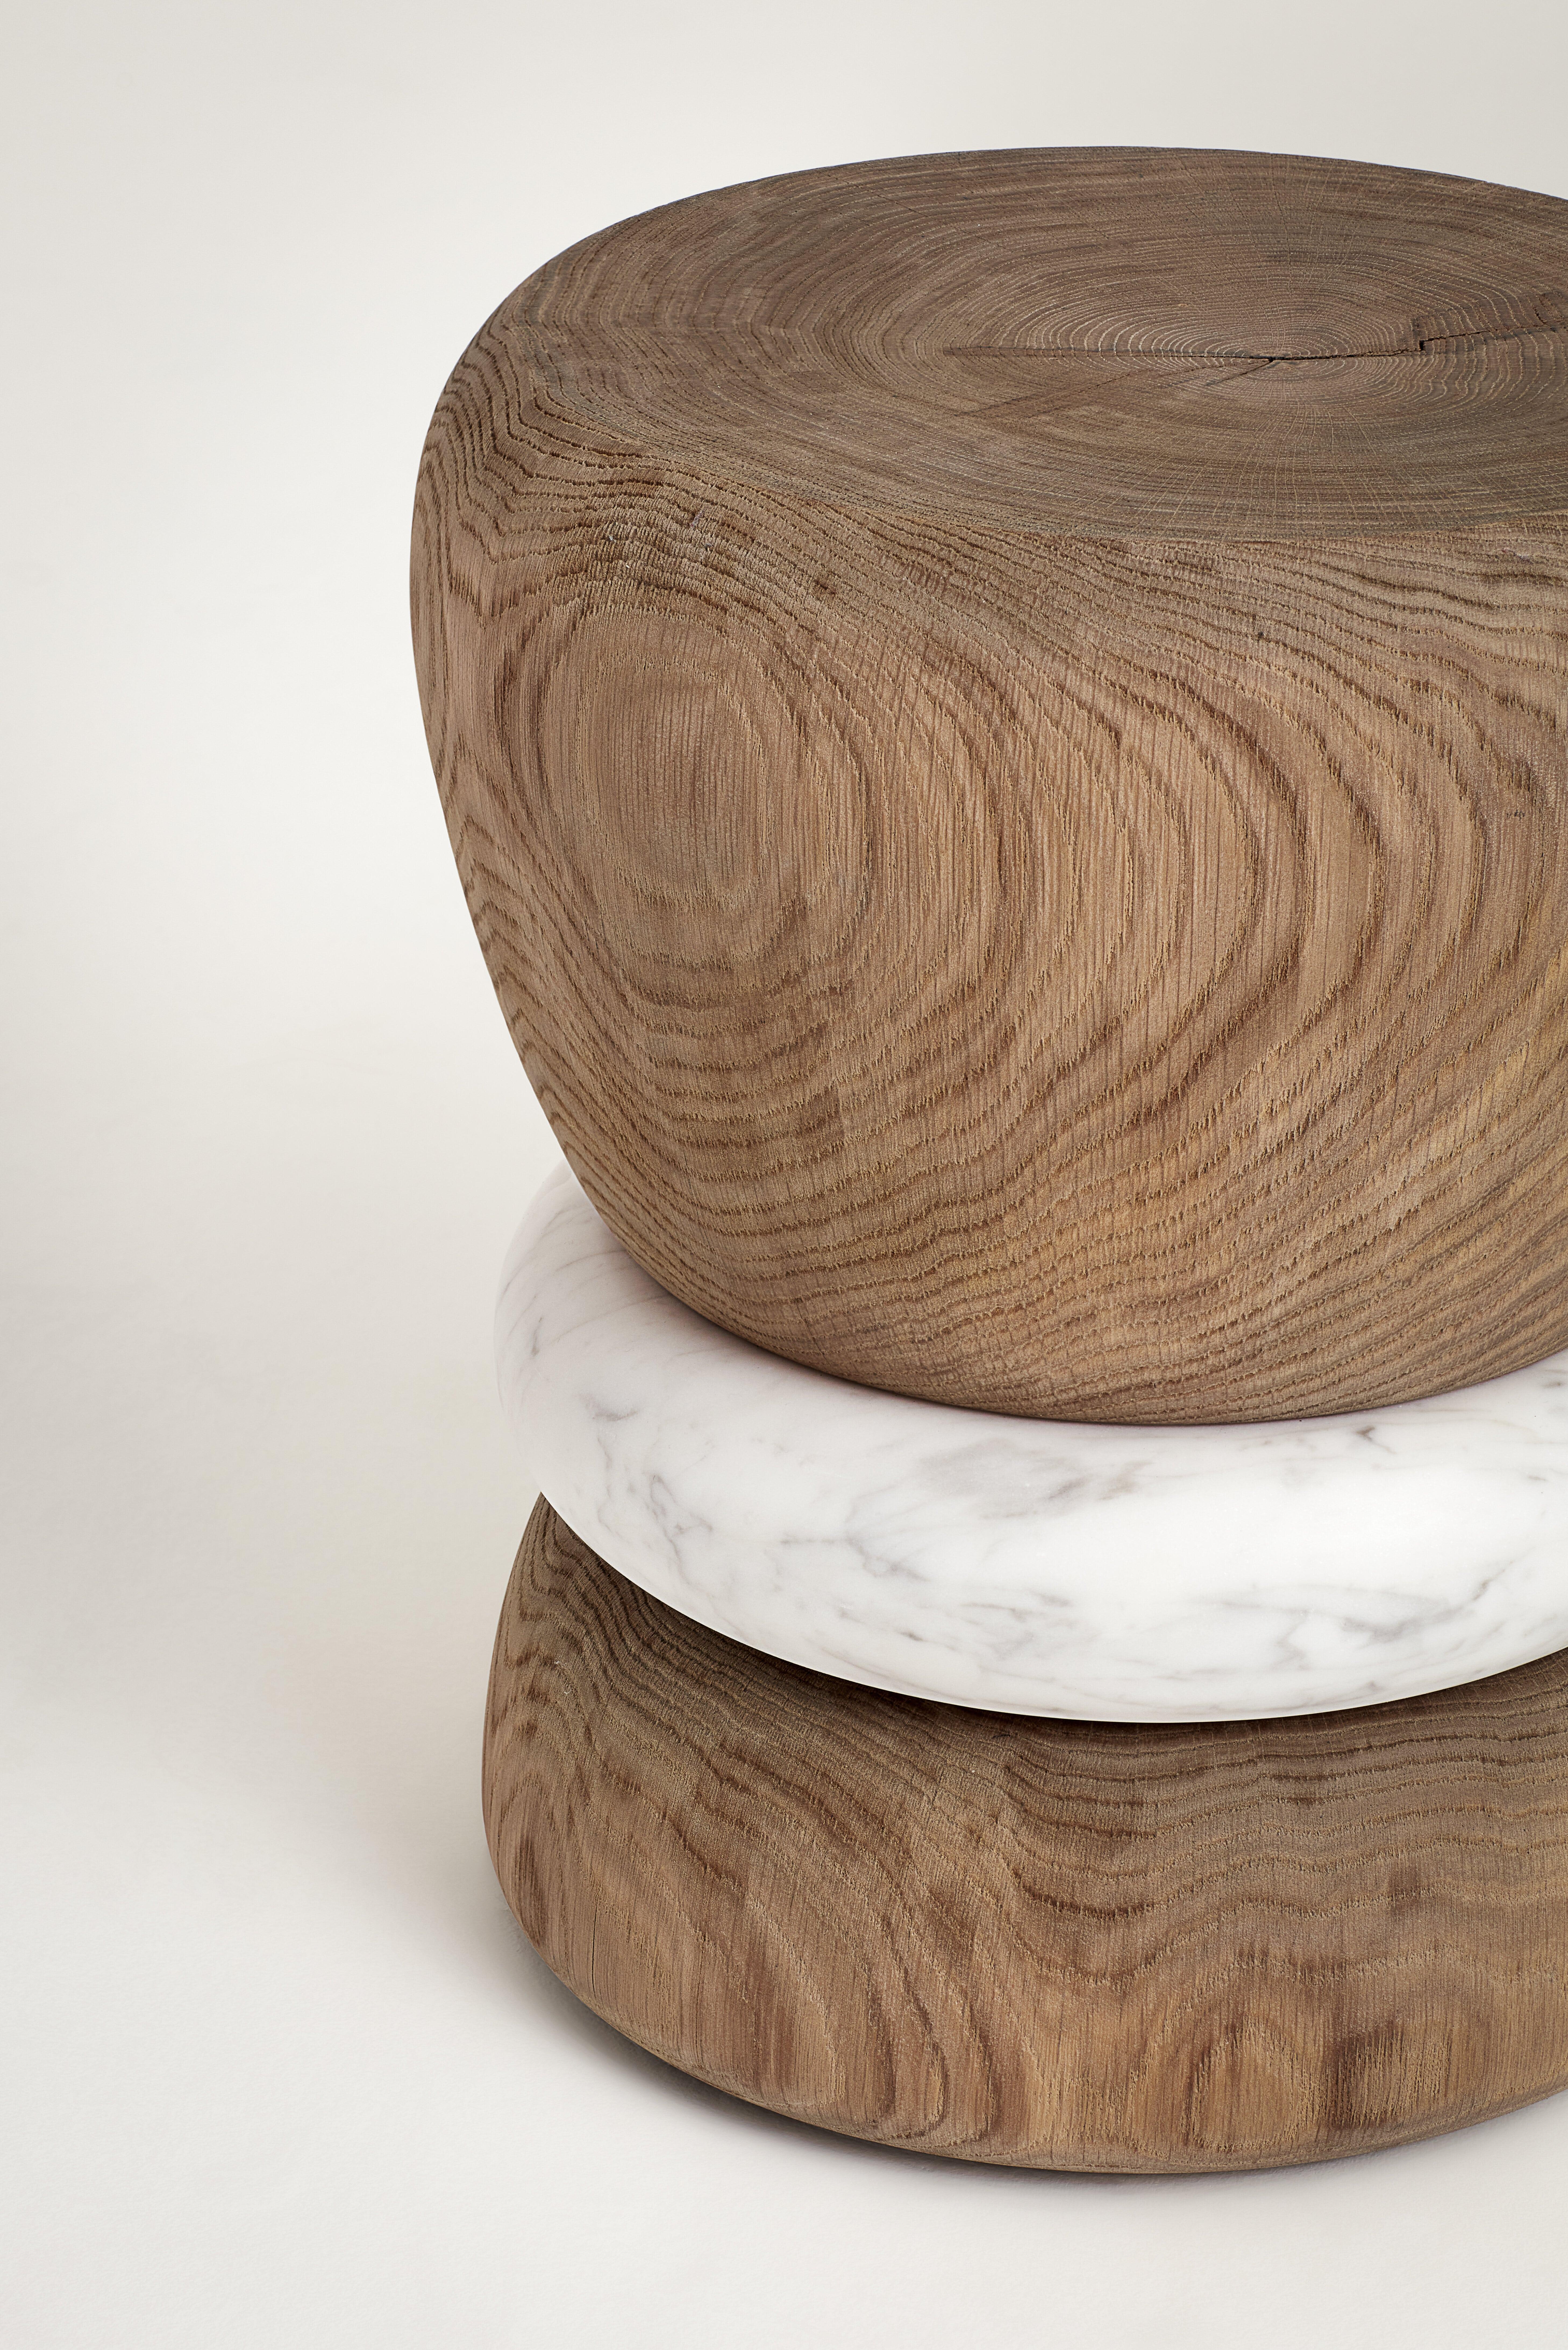 The juxtaposition of oak wood and Carrare marble in the Barri stool gives to the piece a timeless sculptural value that defies time.